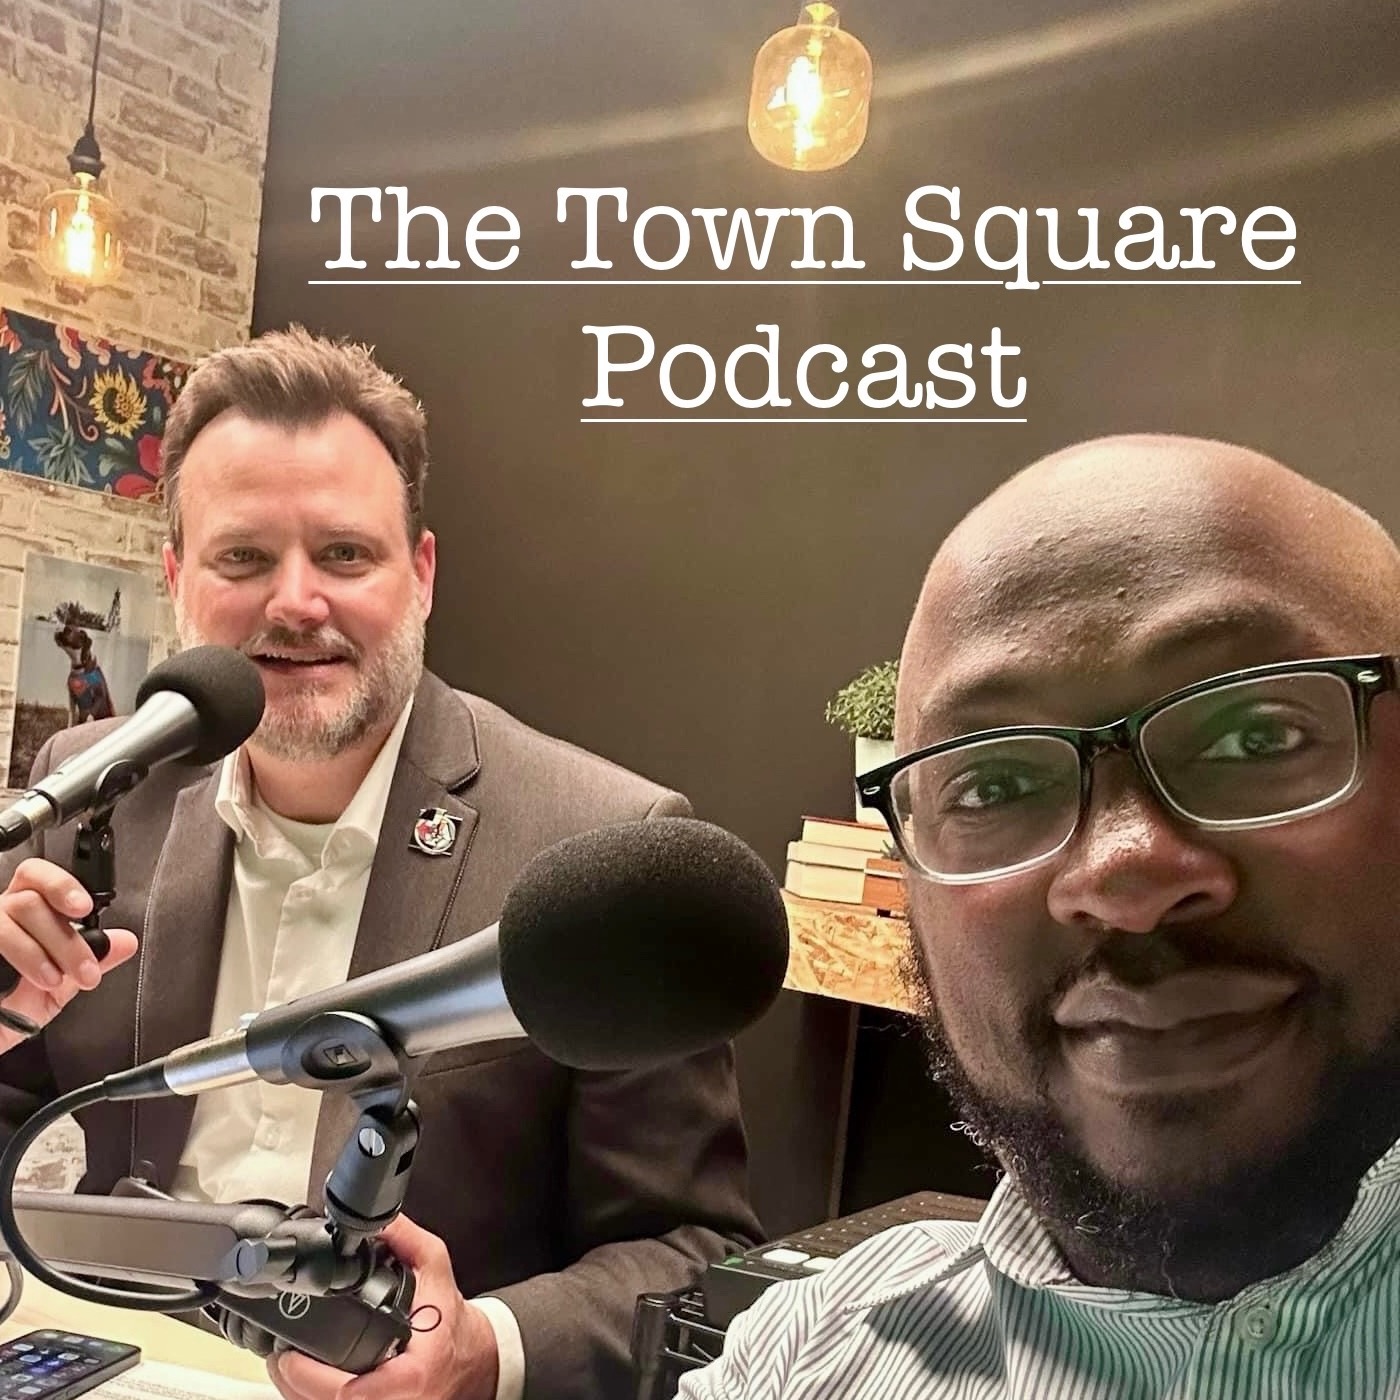 The Town Square Podcast